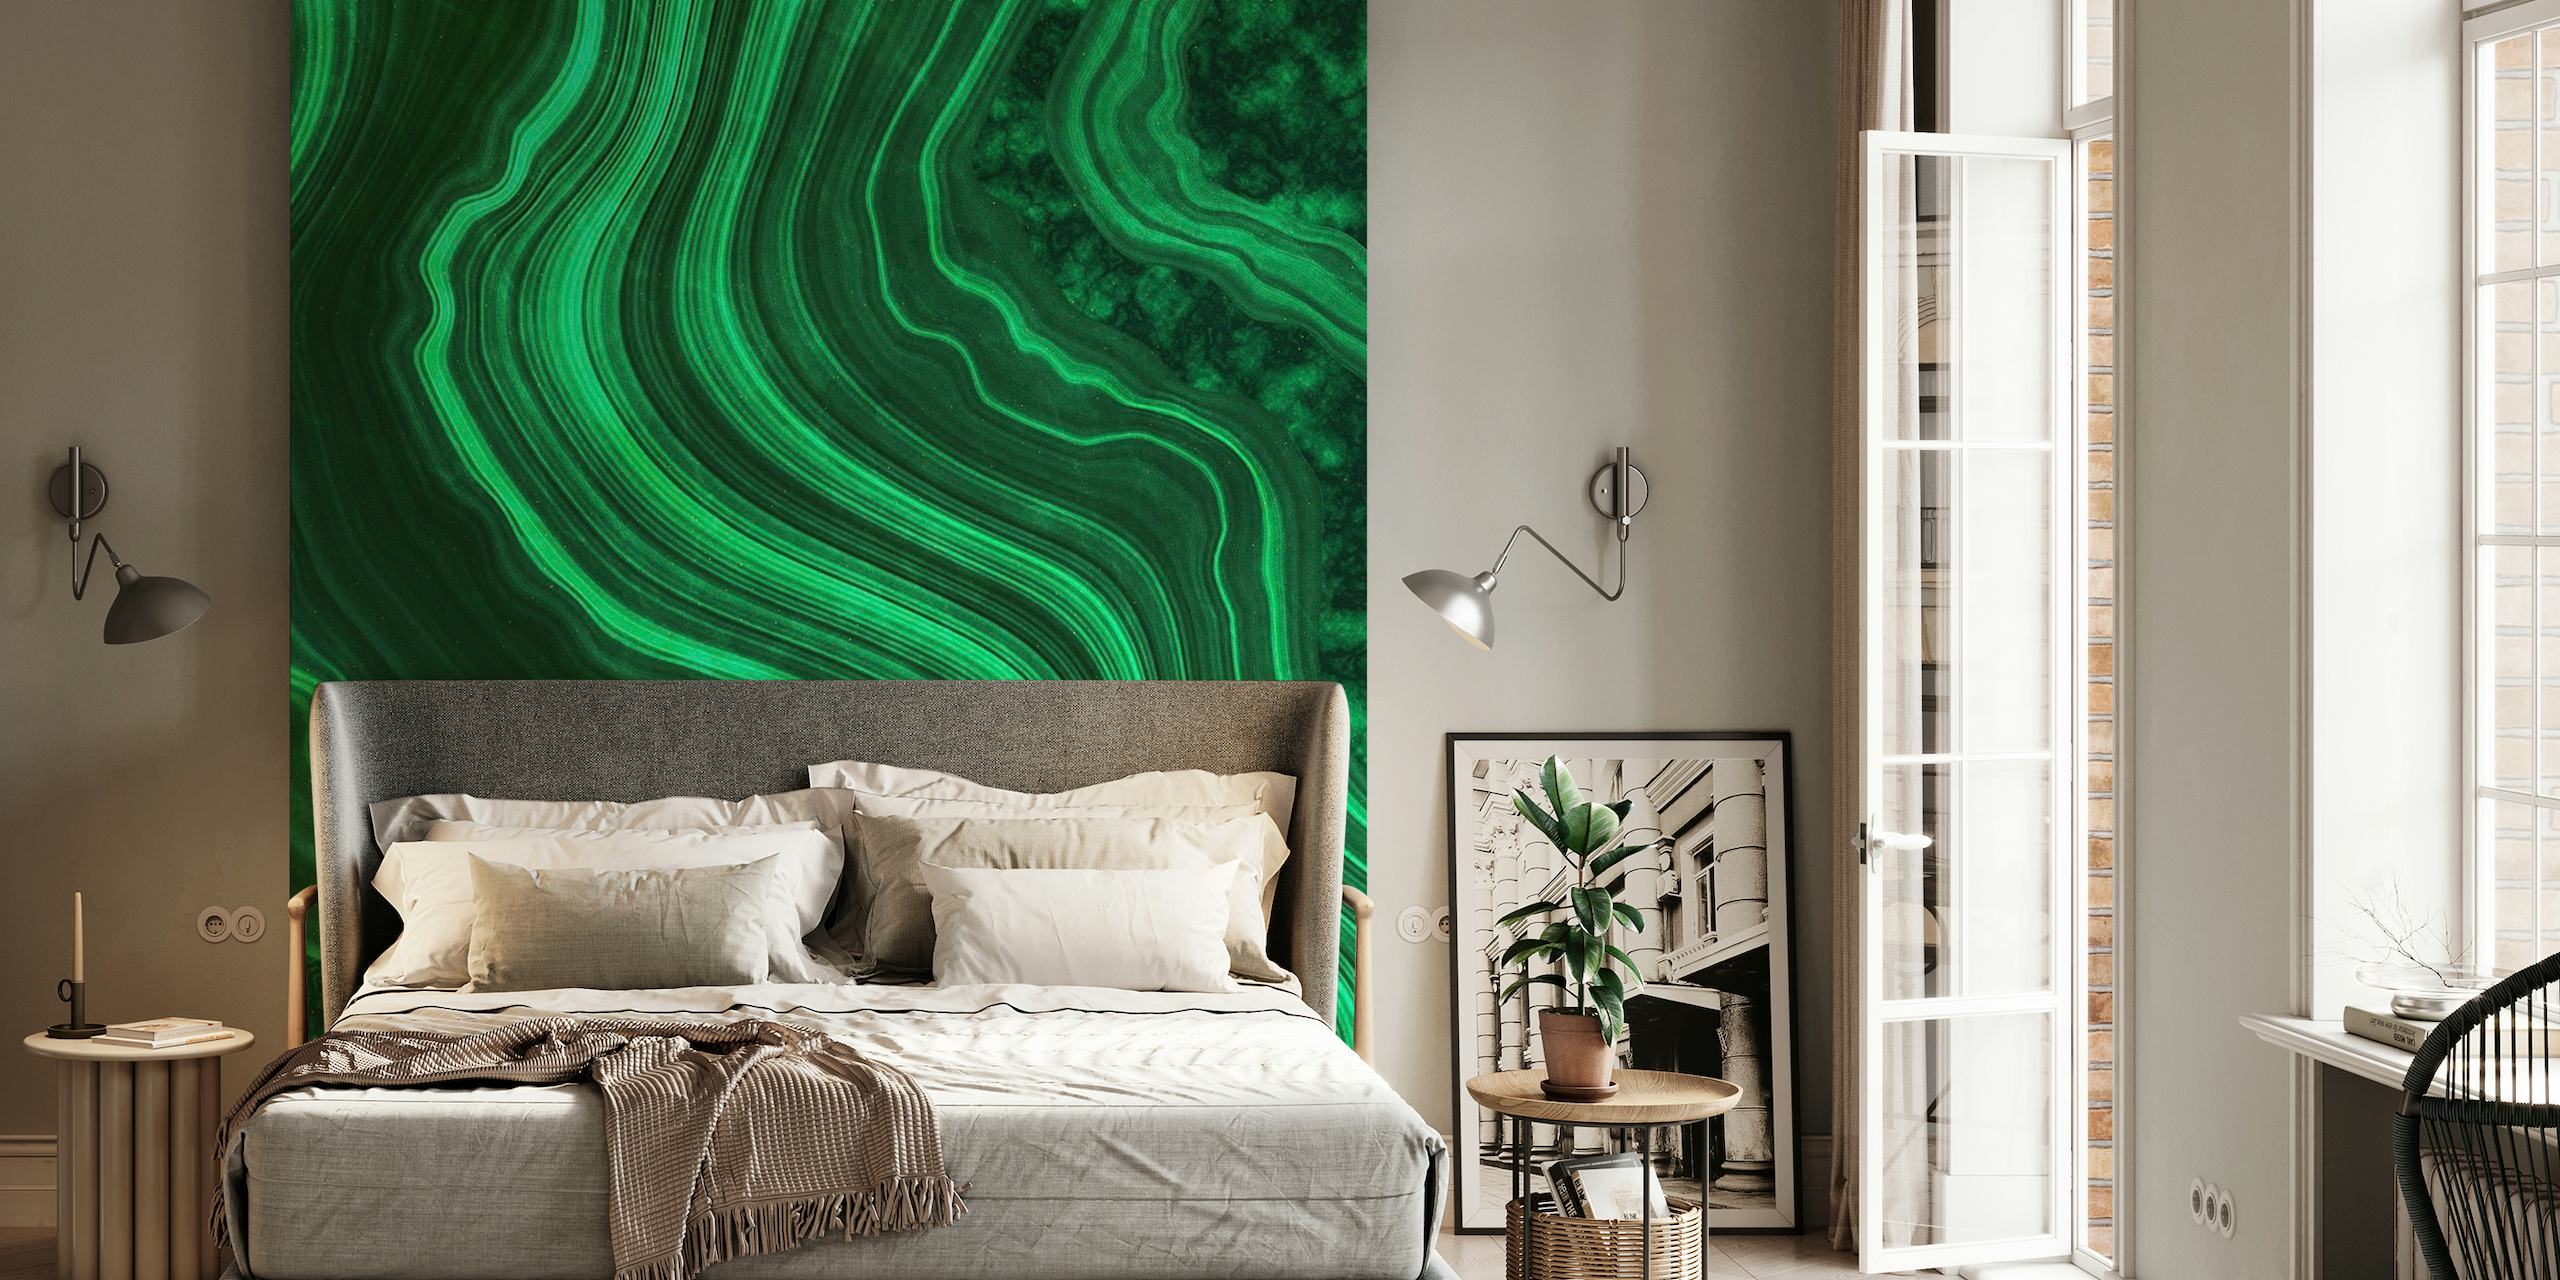 Emerald green marble texture with swirling patterns for wall mural